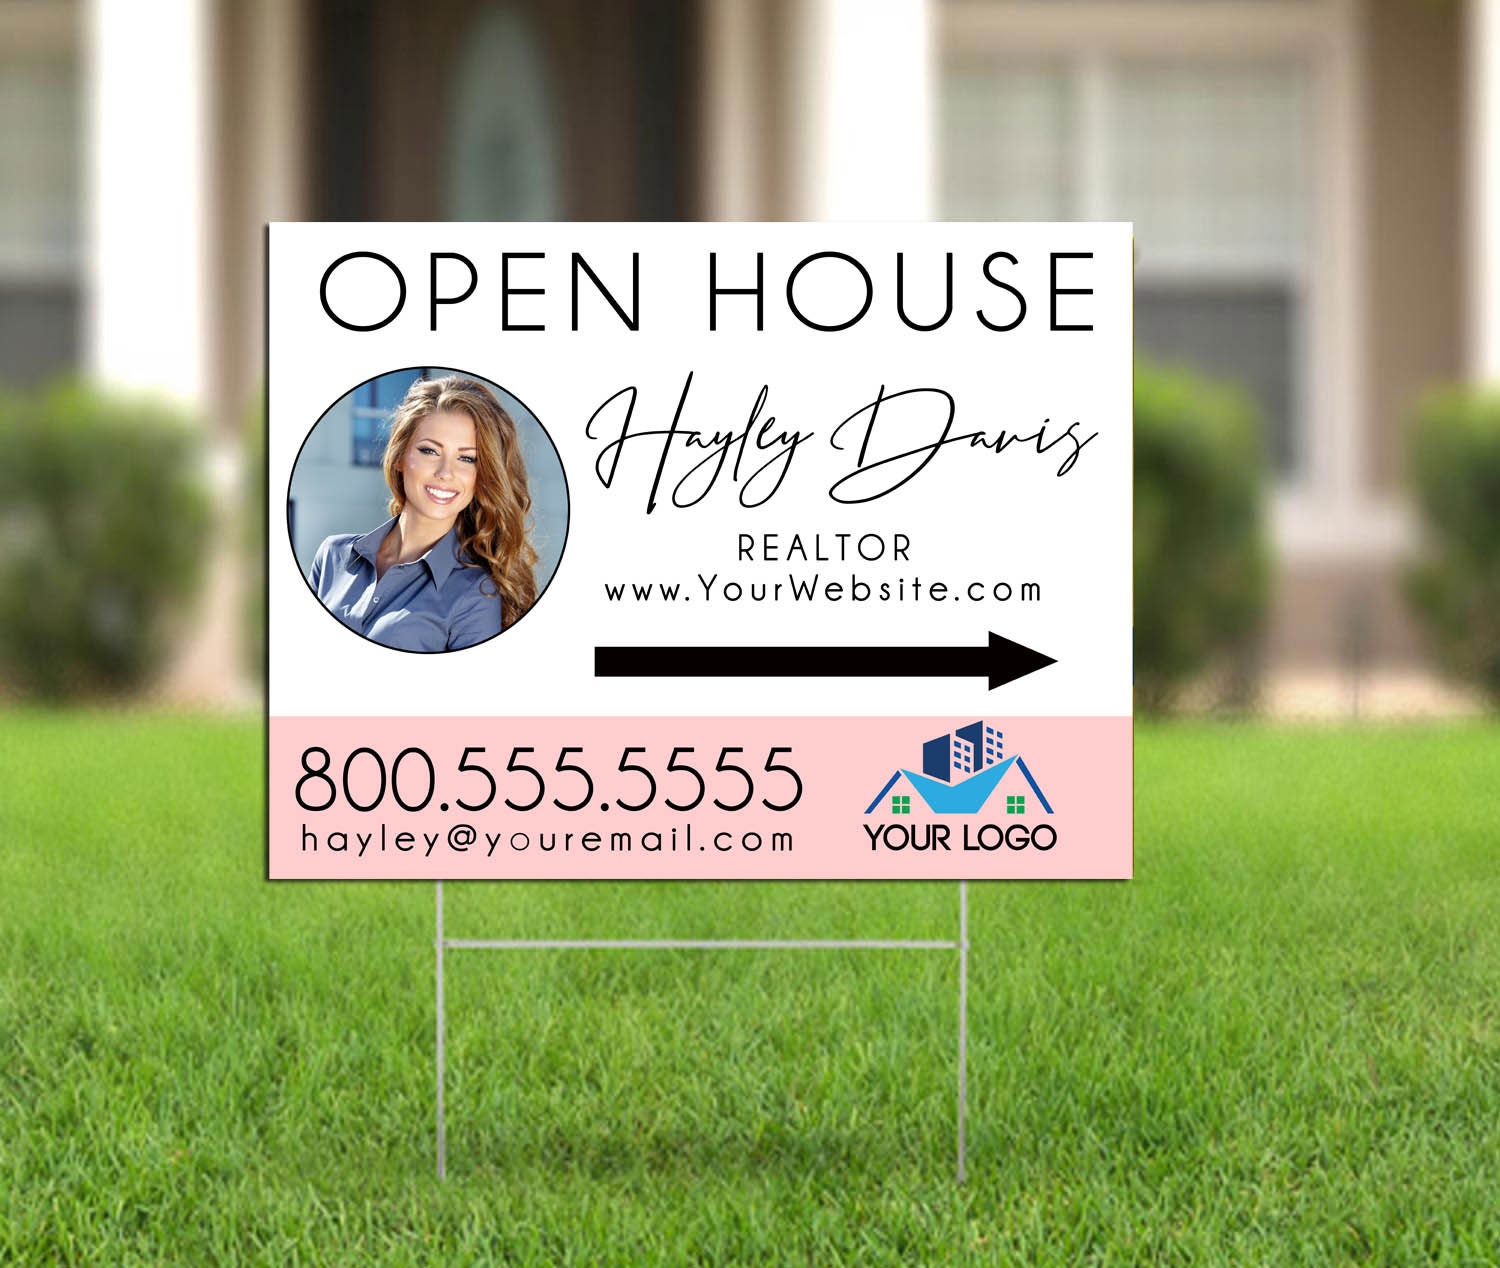 Open House Signs Printing Services in Los Angeles